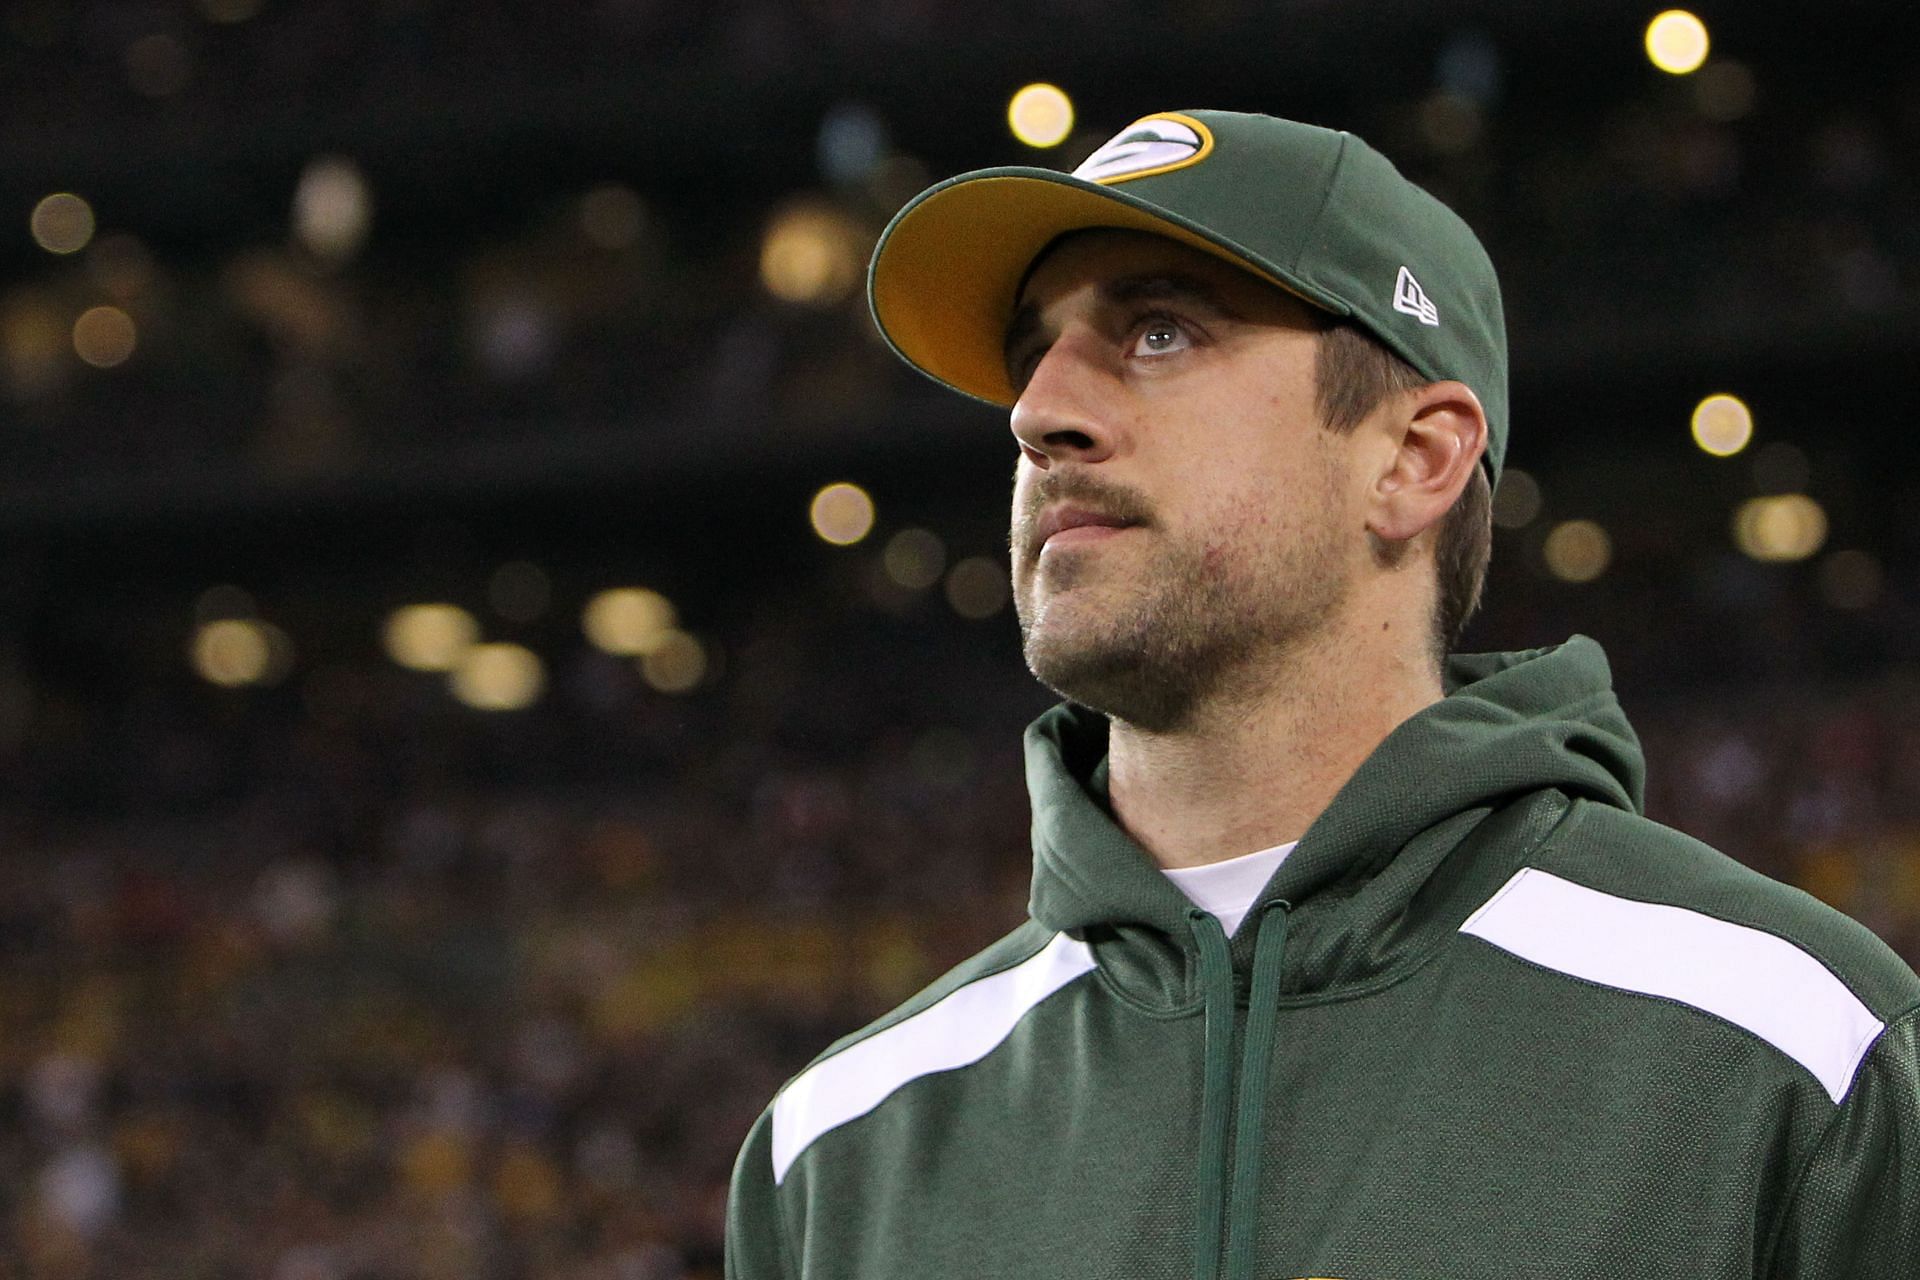 Aaron Rodgers at Chicago Bears v Green Bay Packers